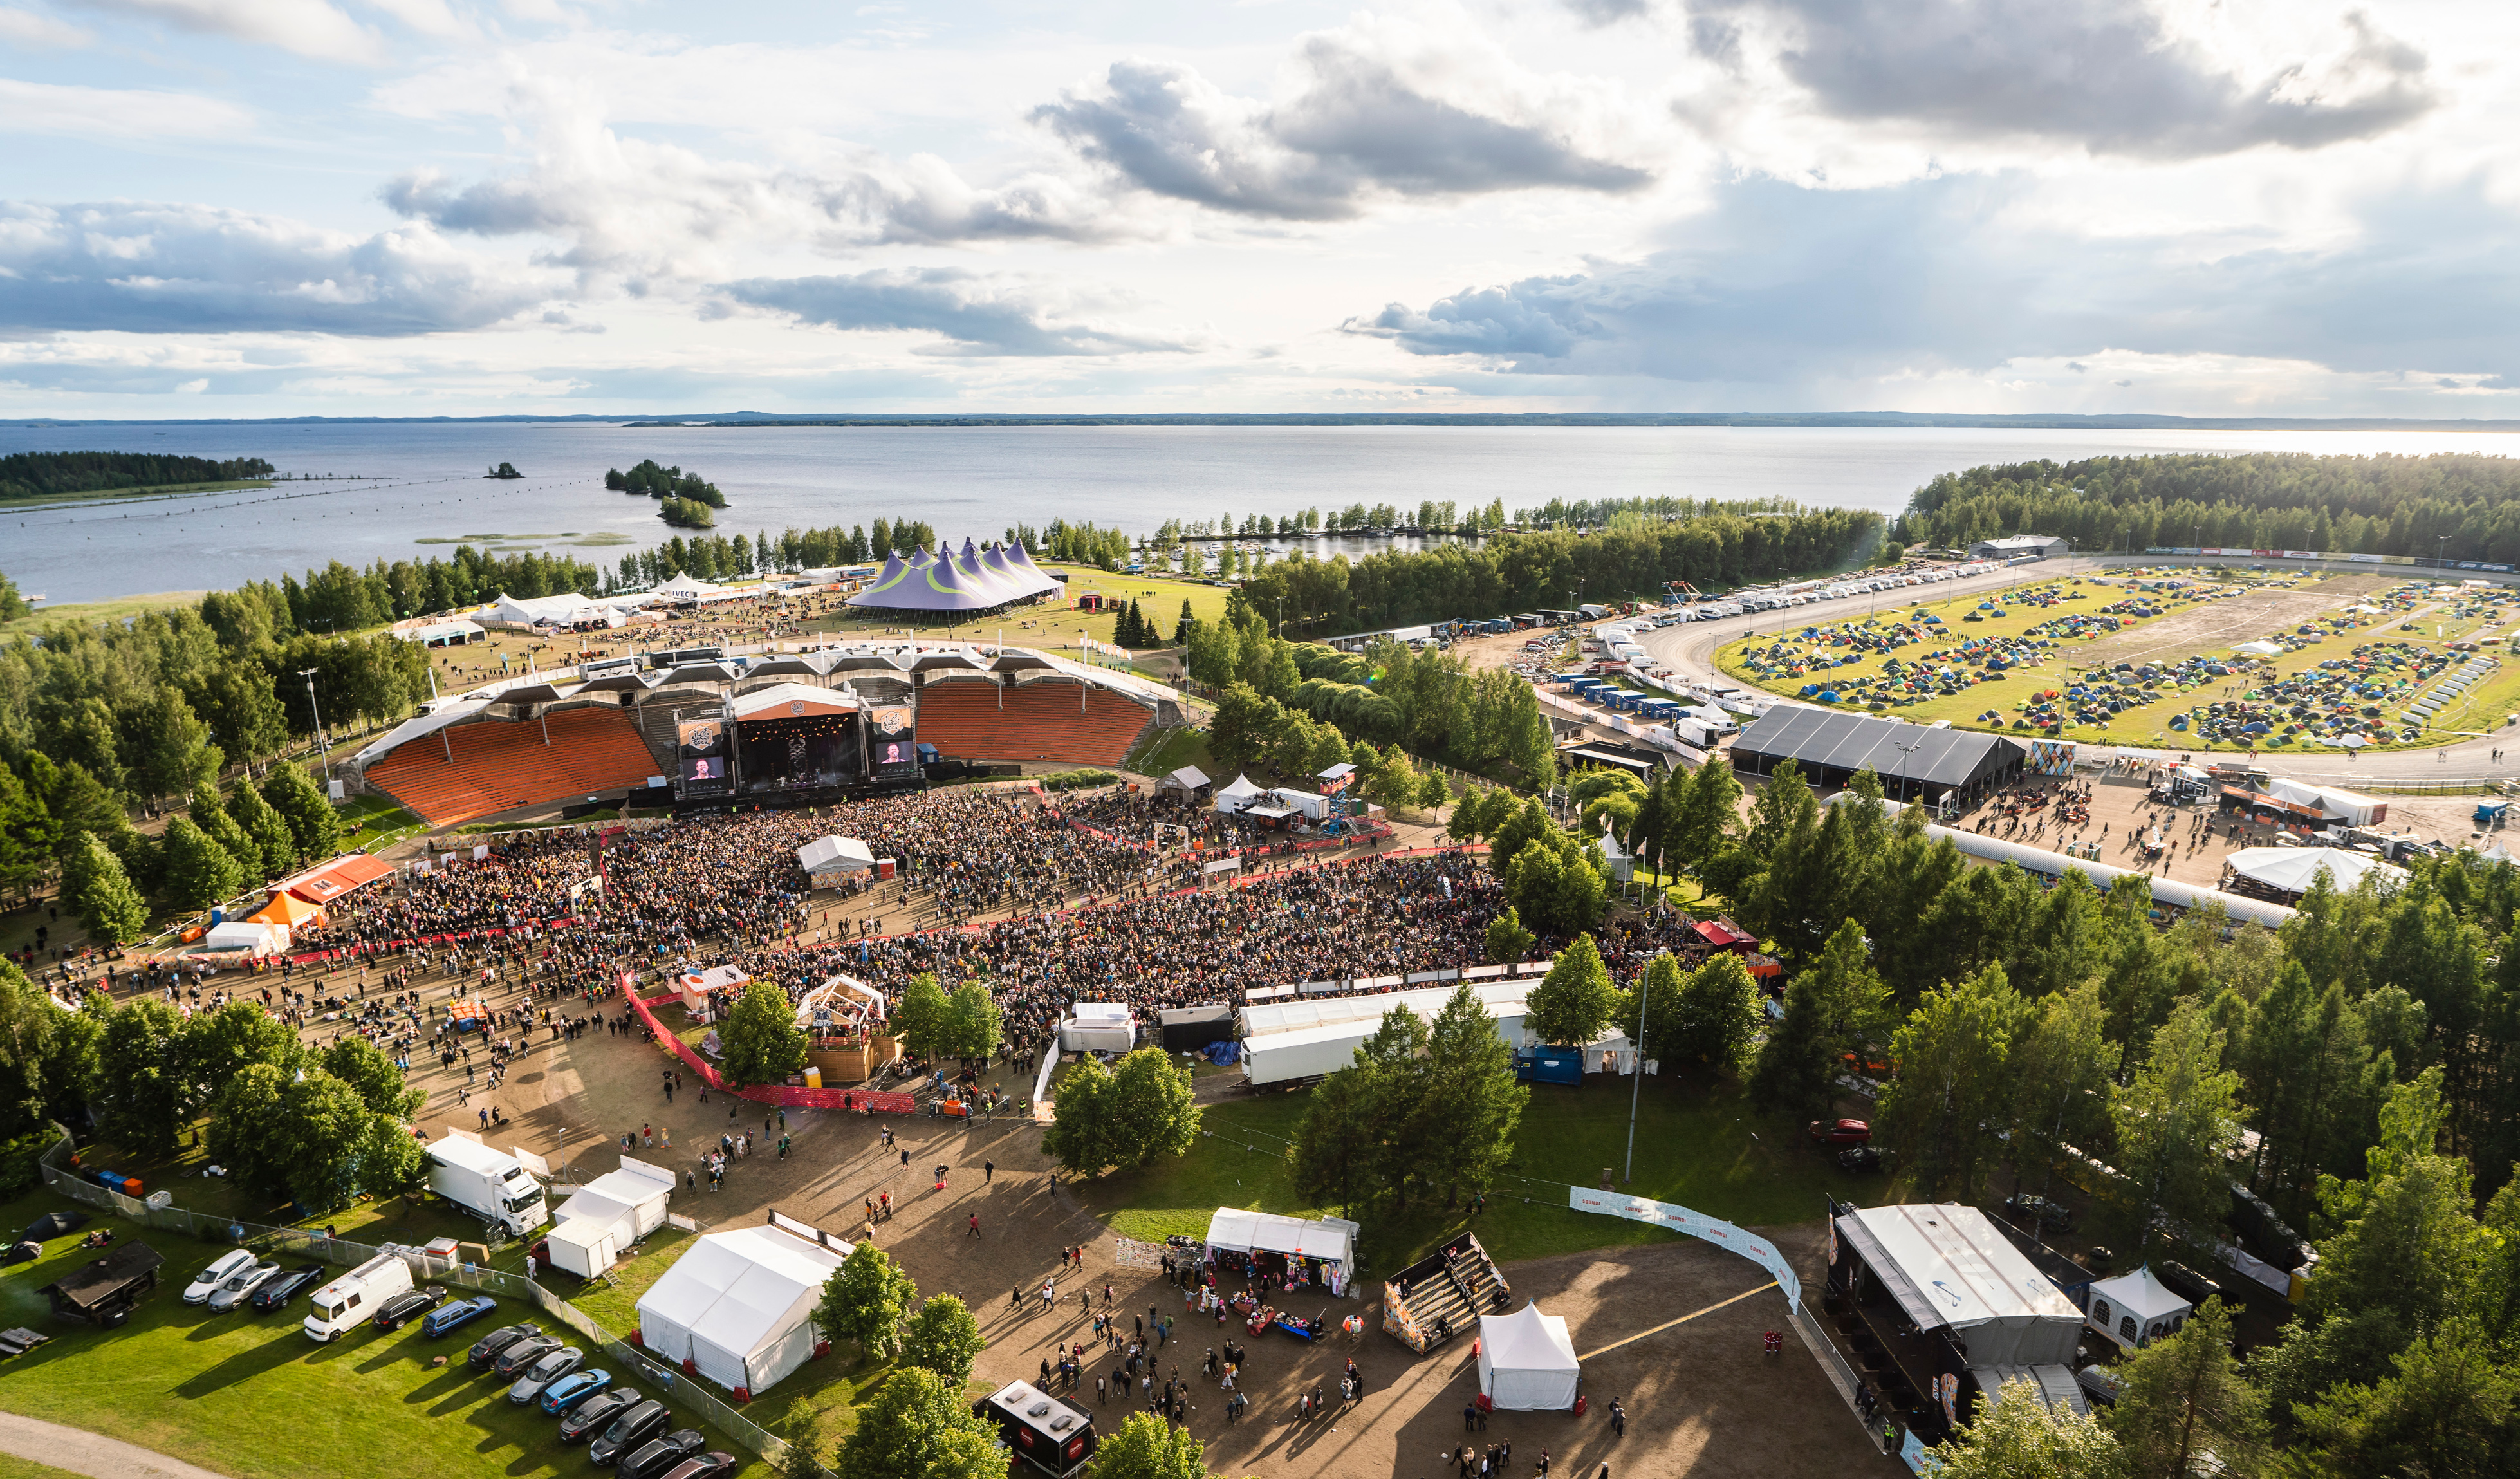 Summer festivals were canceled in Finland as the pandemic continued